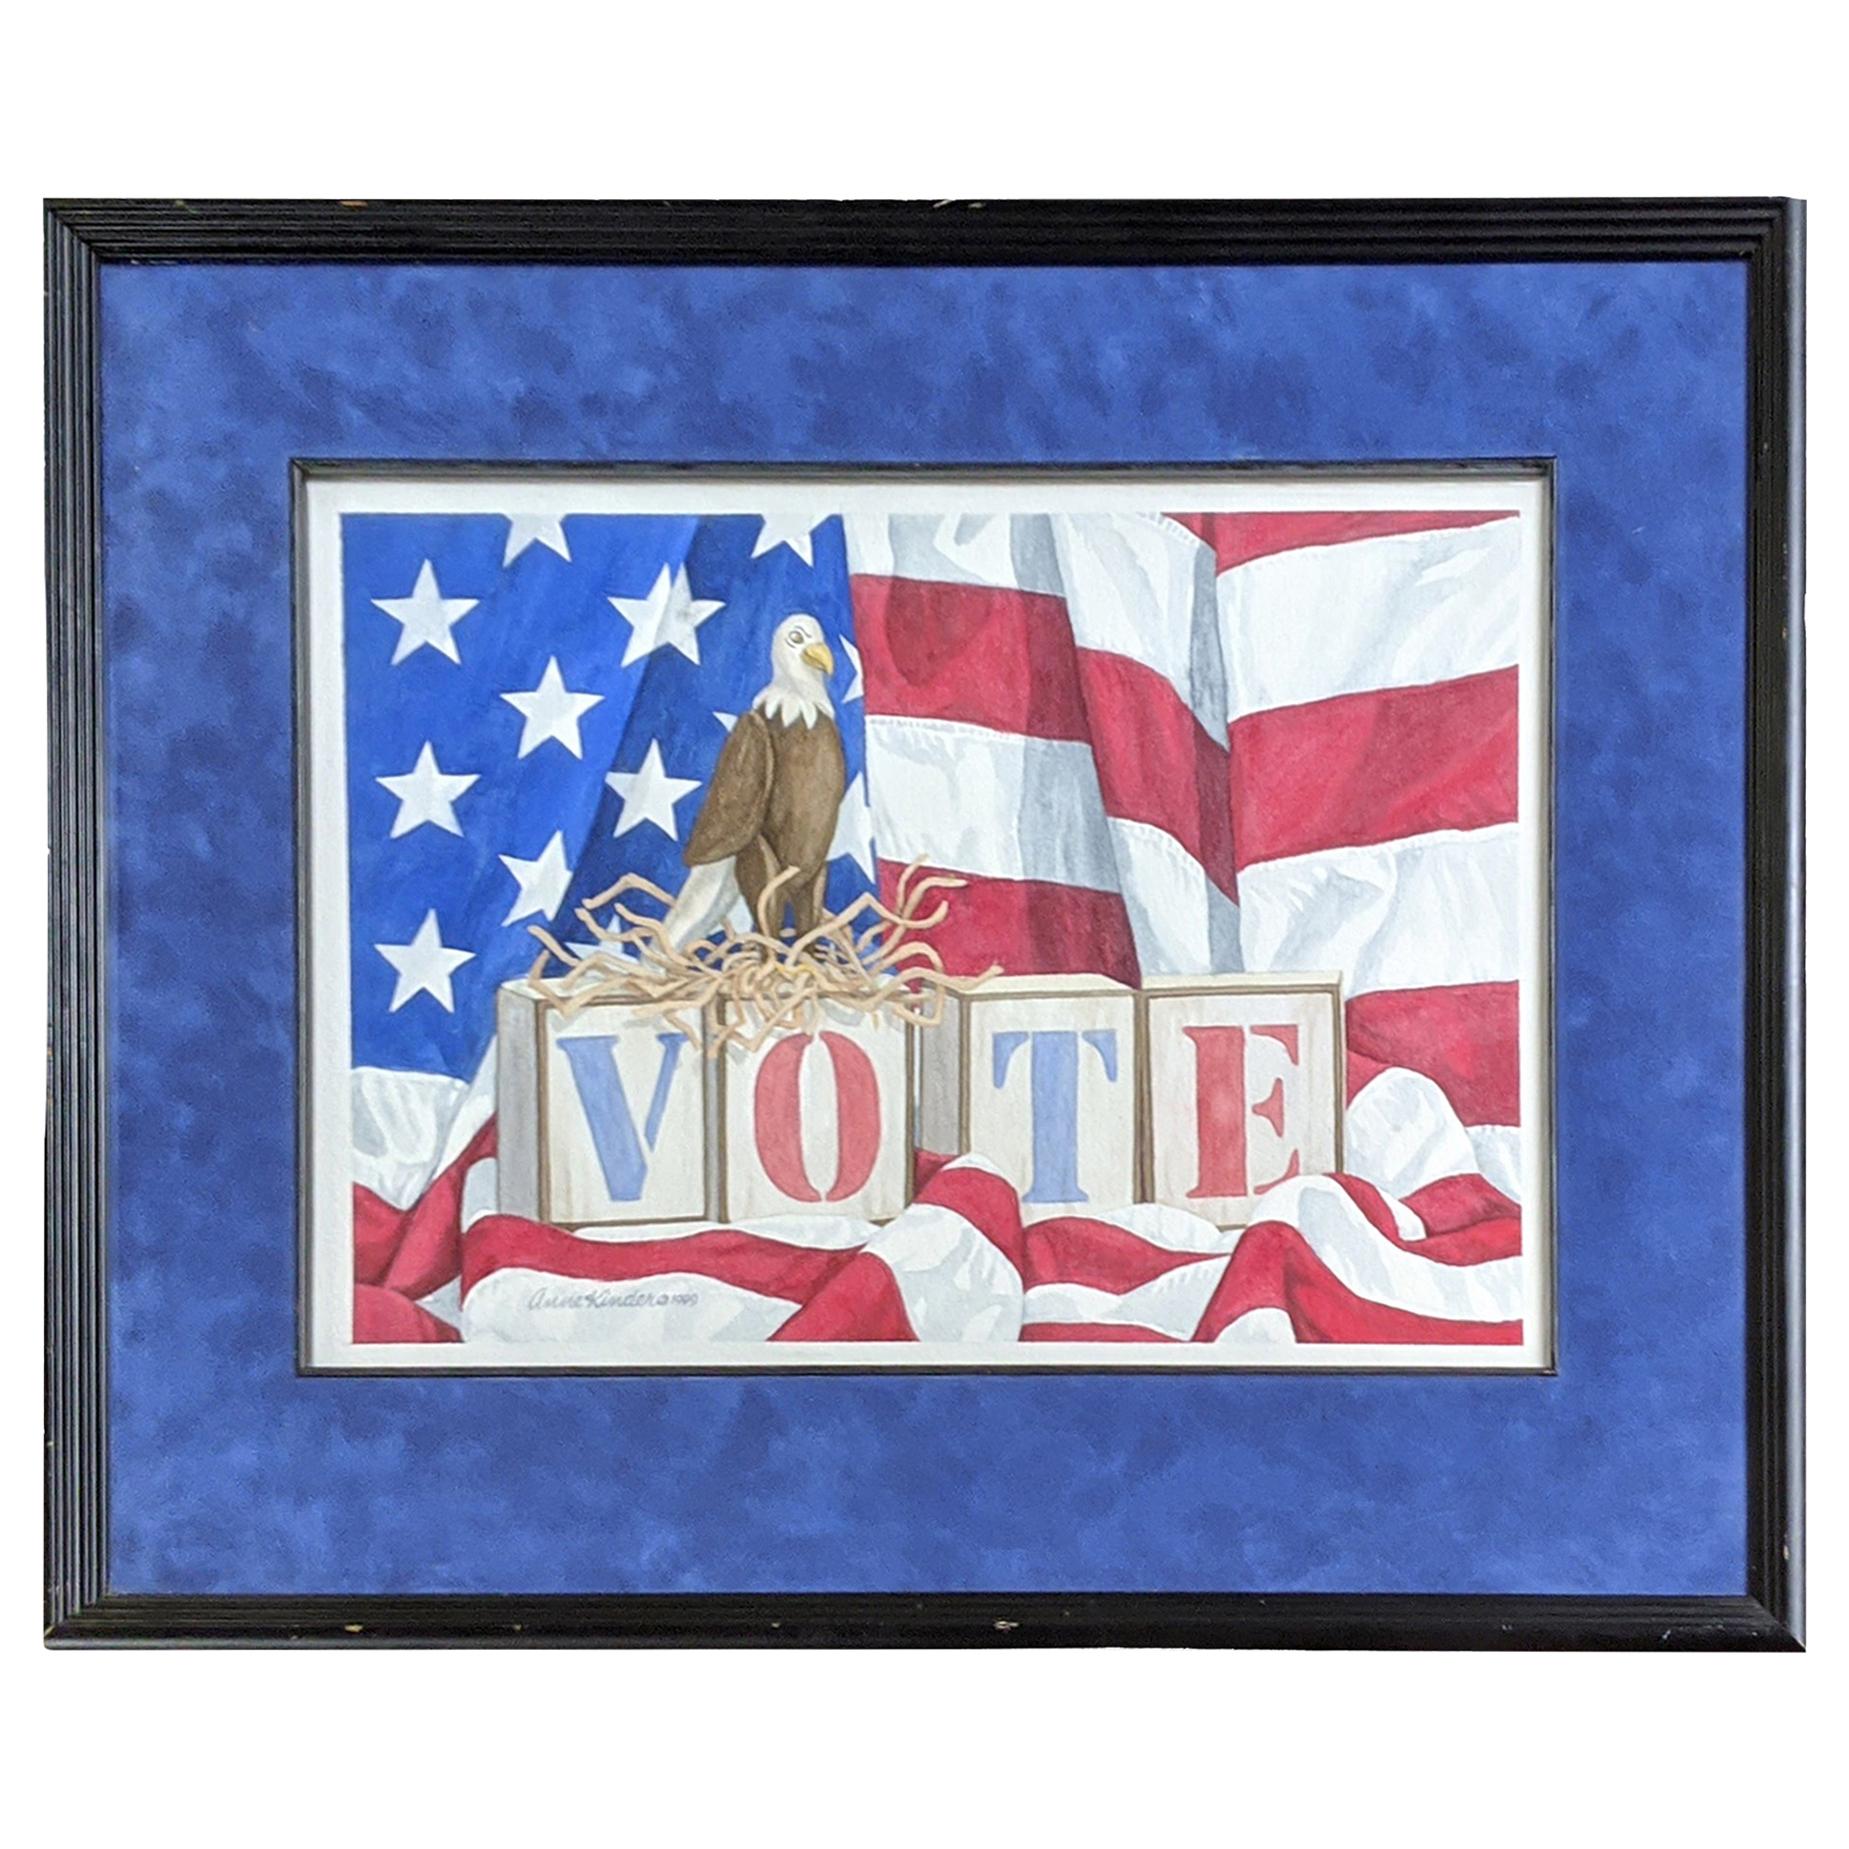 Vote Watercolor by Anne Kinder, 1999